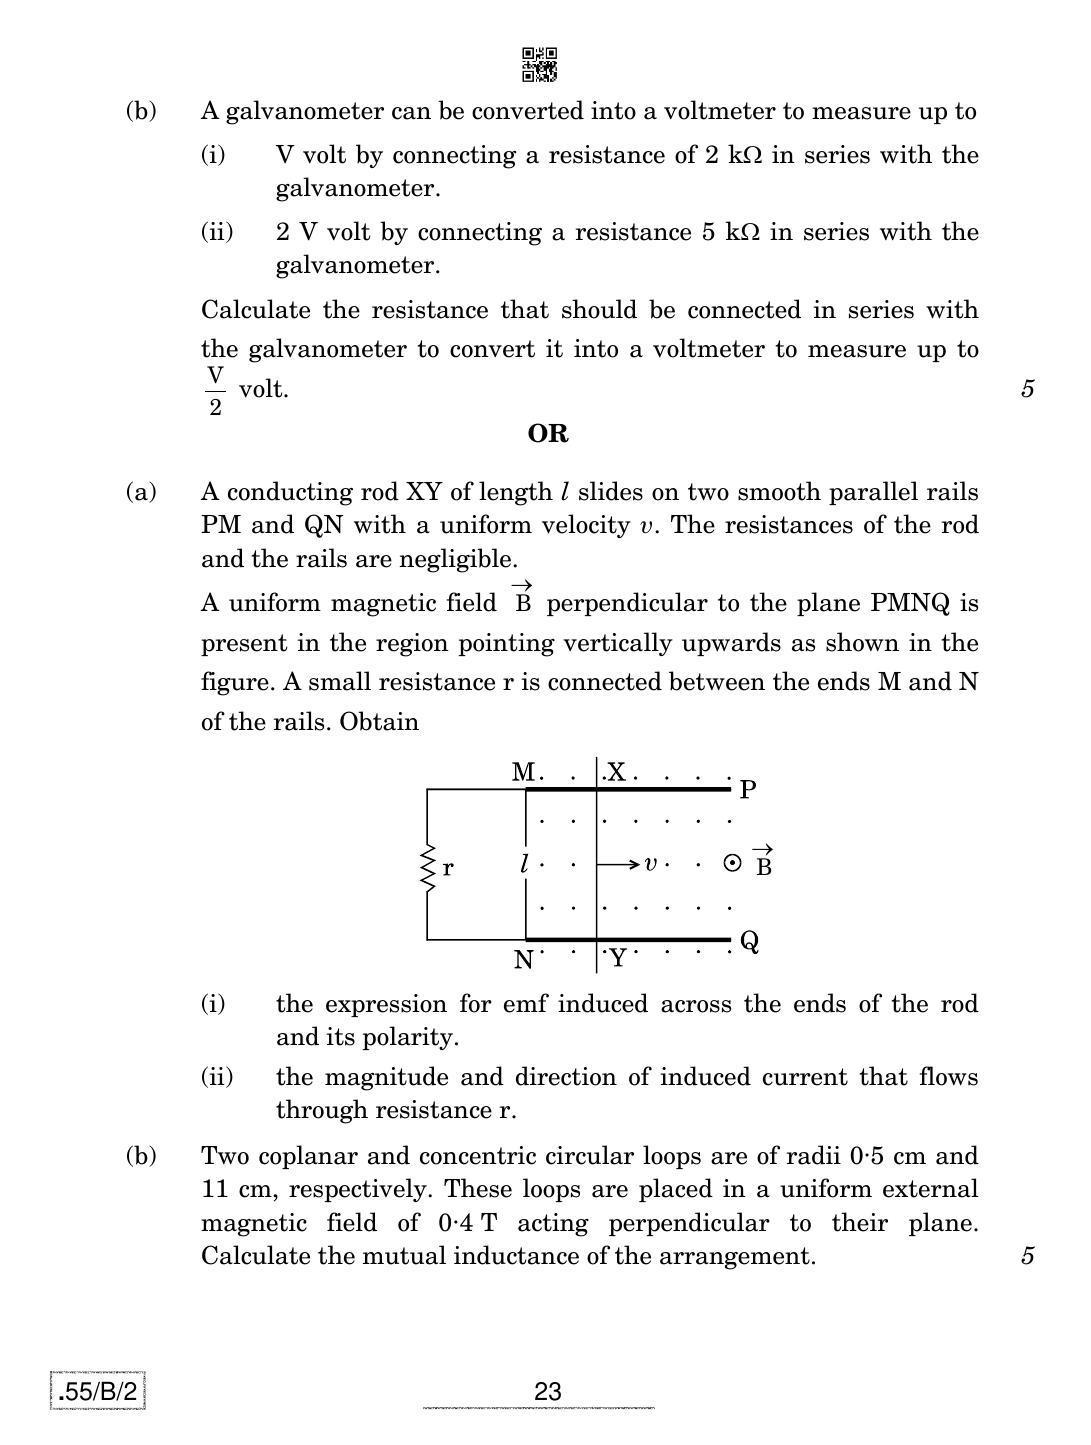 CBSE Class 12 55-C-2 - Physics 2020 Compartment Question Paper - Page 23